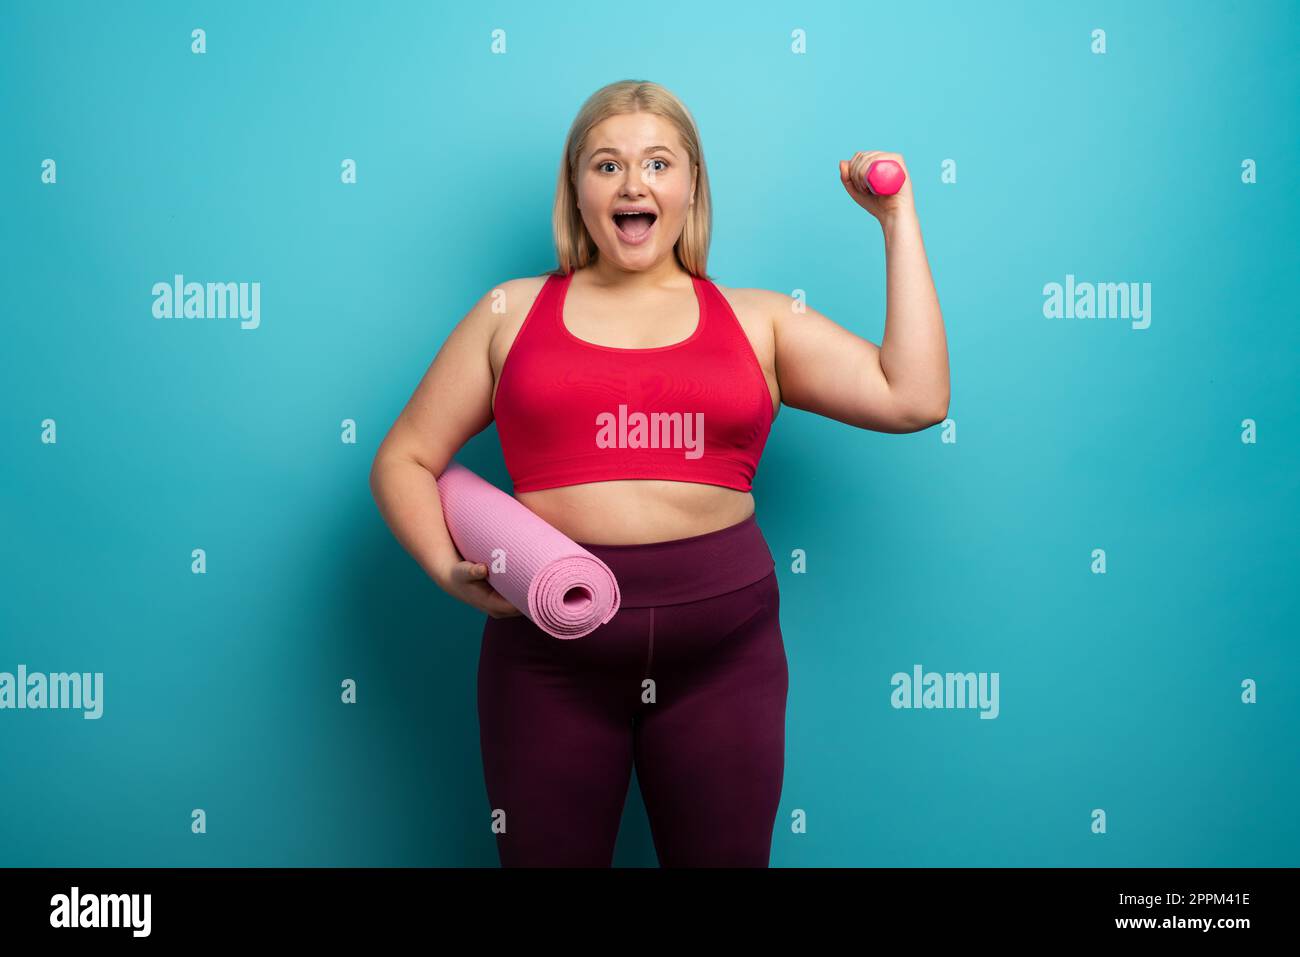 Fat girl does gym at home. satisfied expression. Cyan background Stock Photo